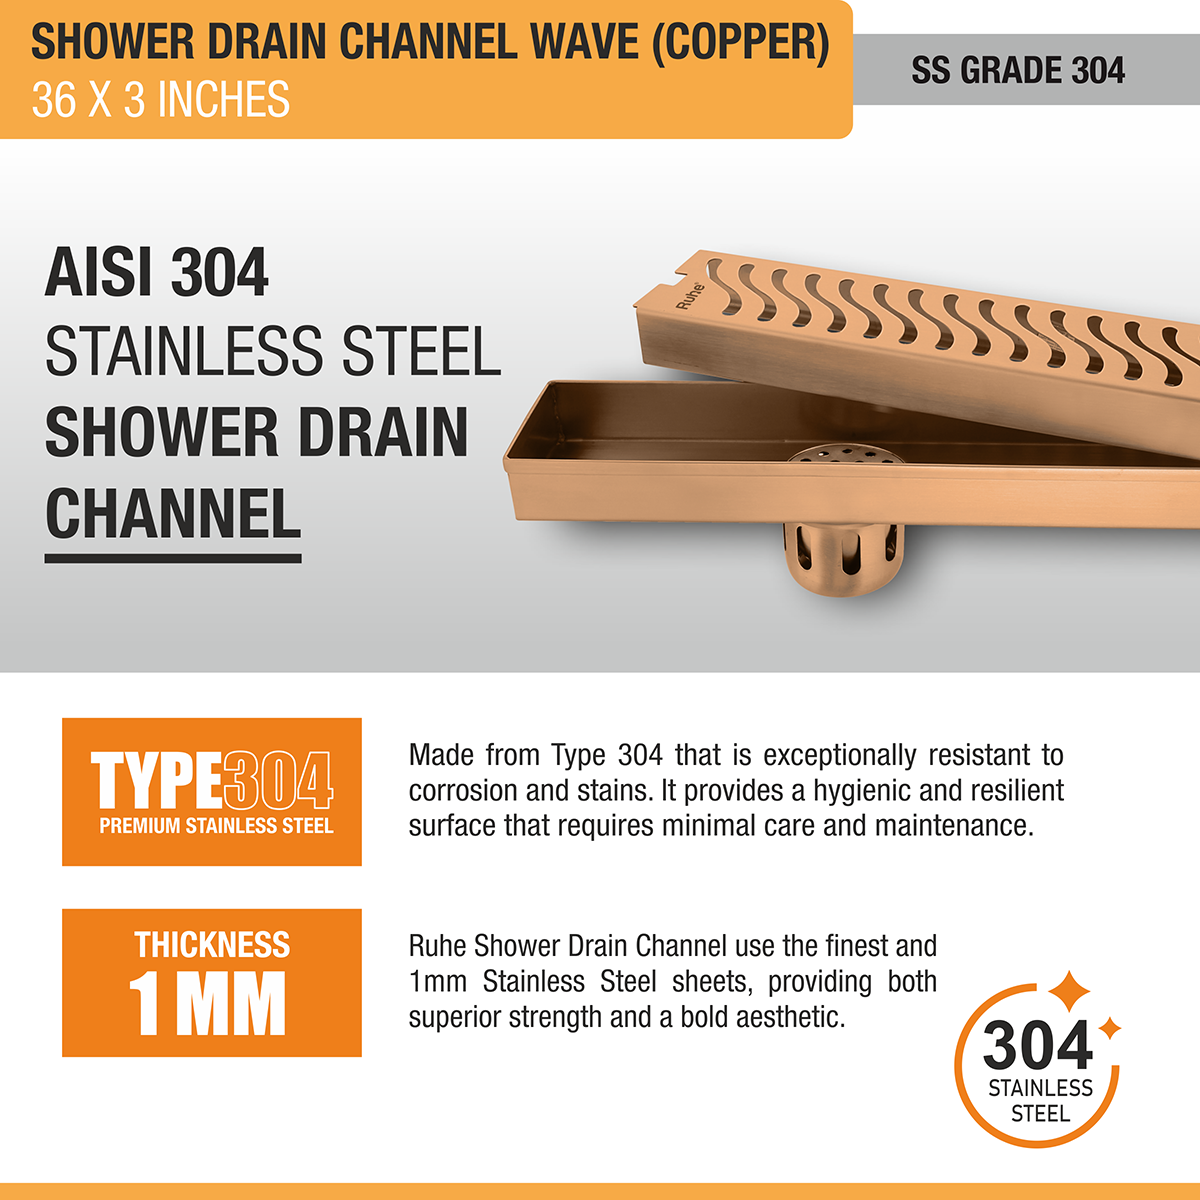 Wave Shower Drain Channel (36 x 3 Inches) ROSE GOLD/ANTIQUE COPPER stainless steel